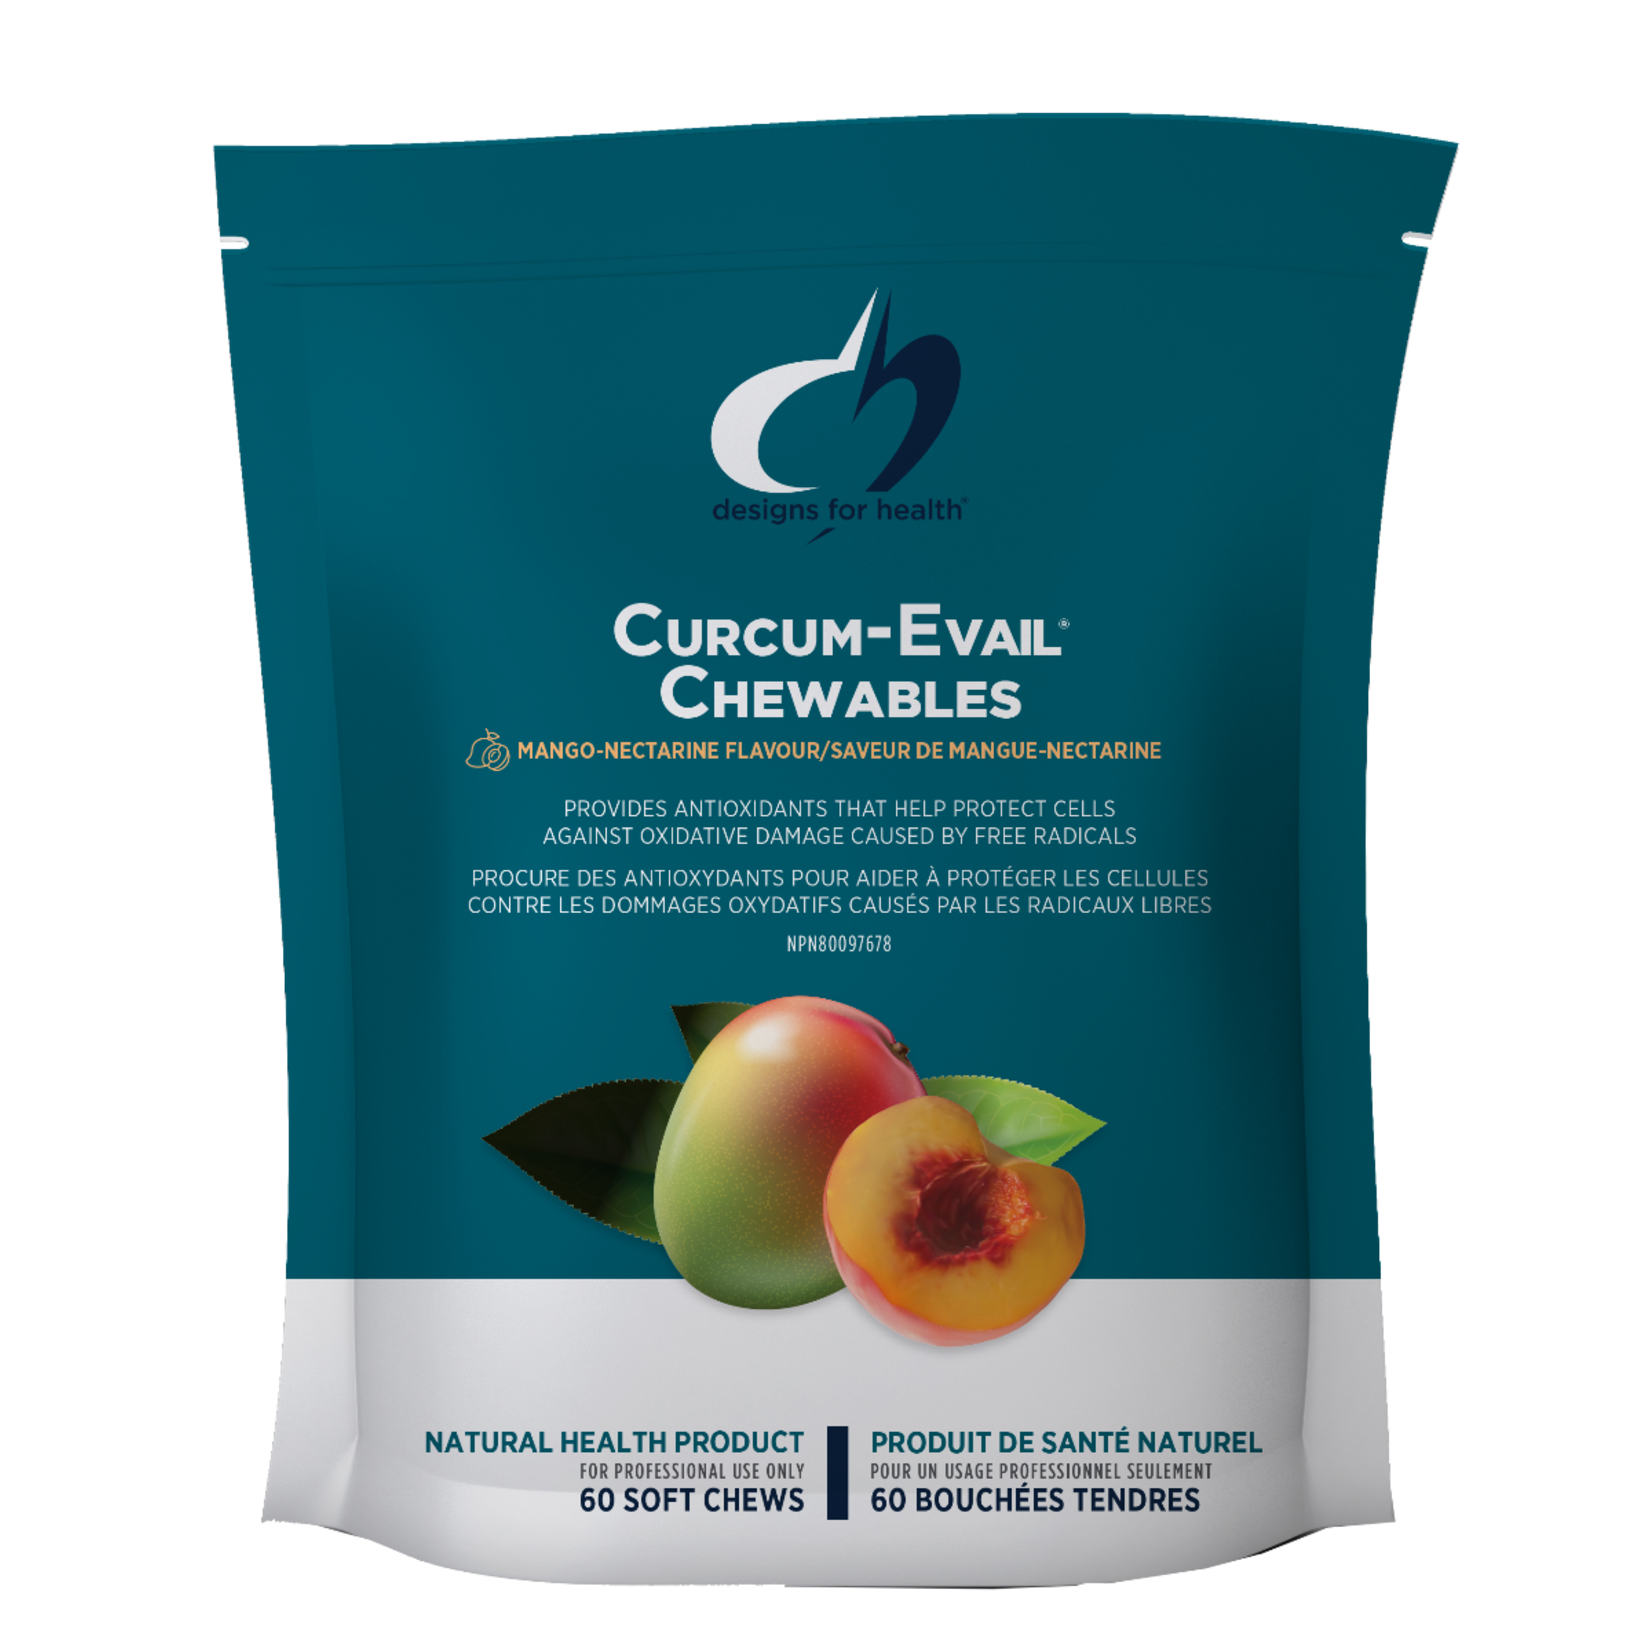 DESIGNS FOR HEALTH DESIGNS FOR HEALTH CURCUM-EVAIL CHEWABLE (DISCONTINUED)